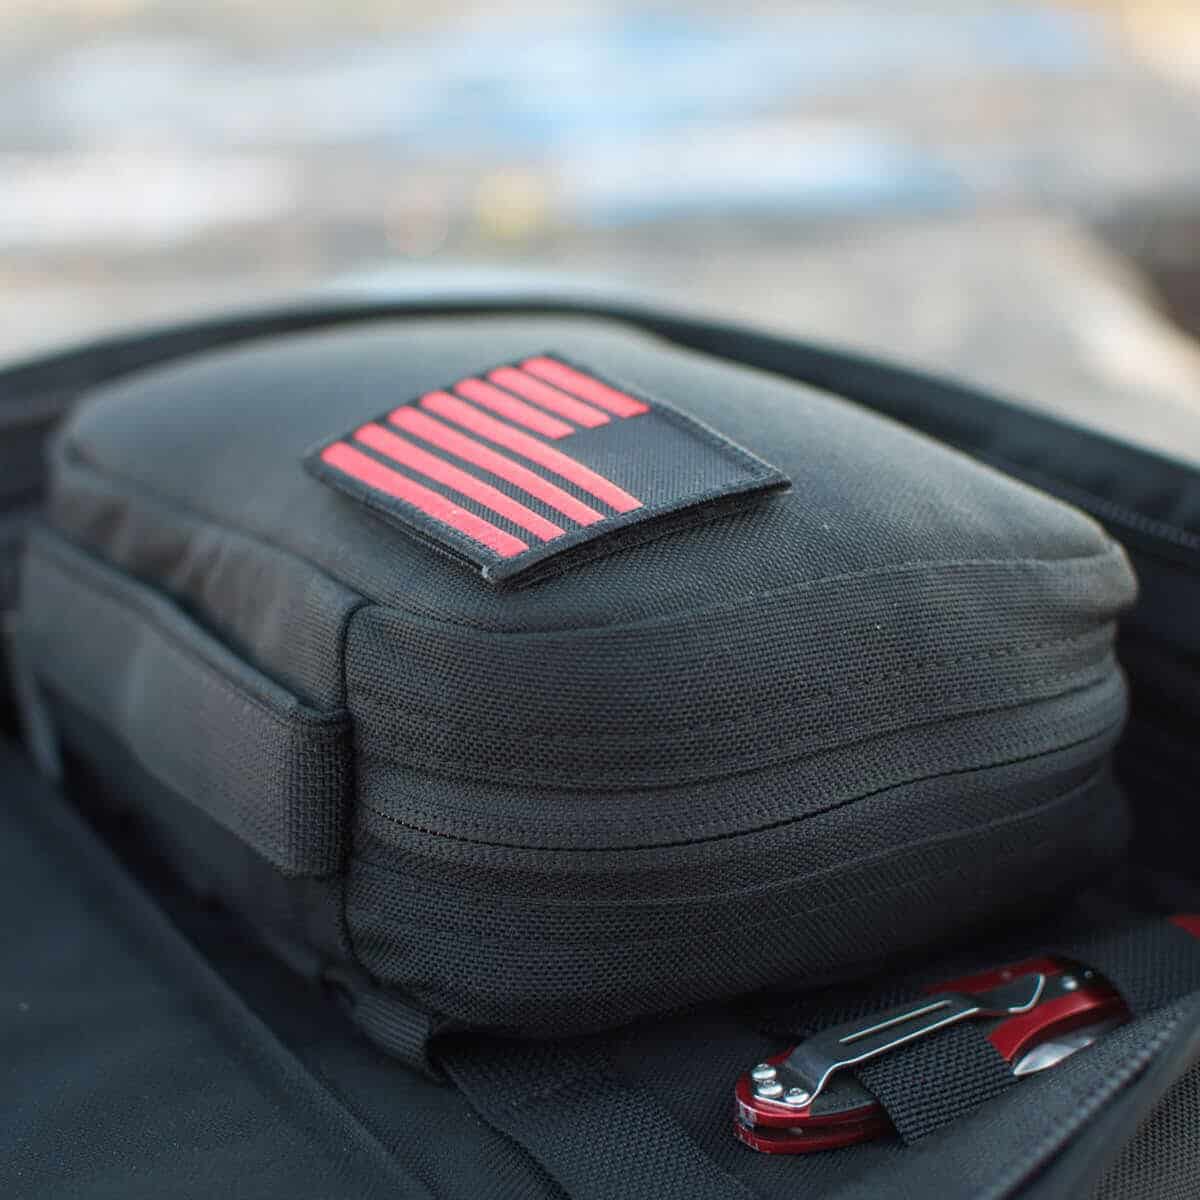 GORUCK GR1 Field Pocket - USA molle attached